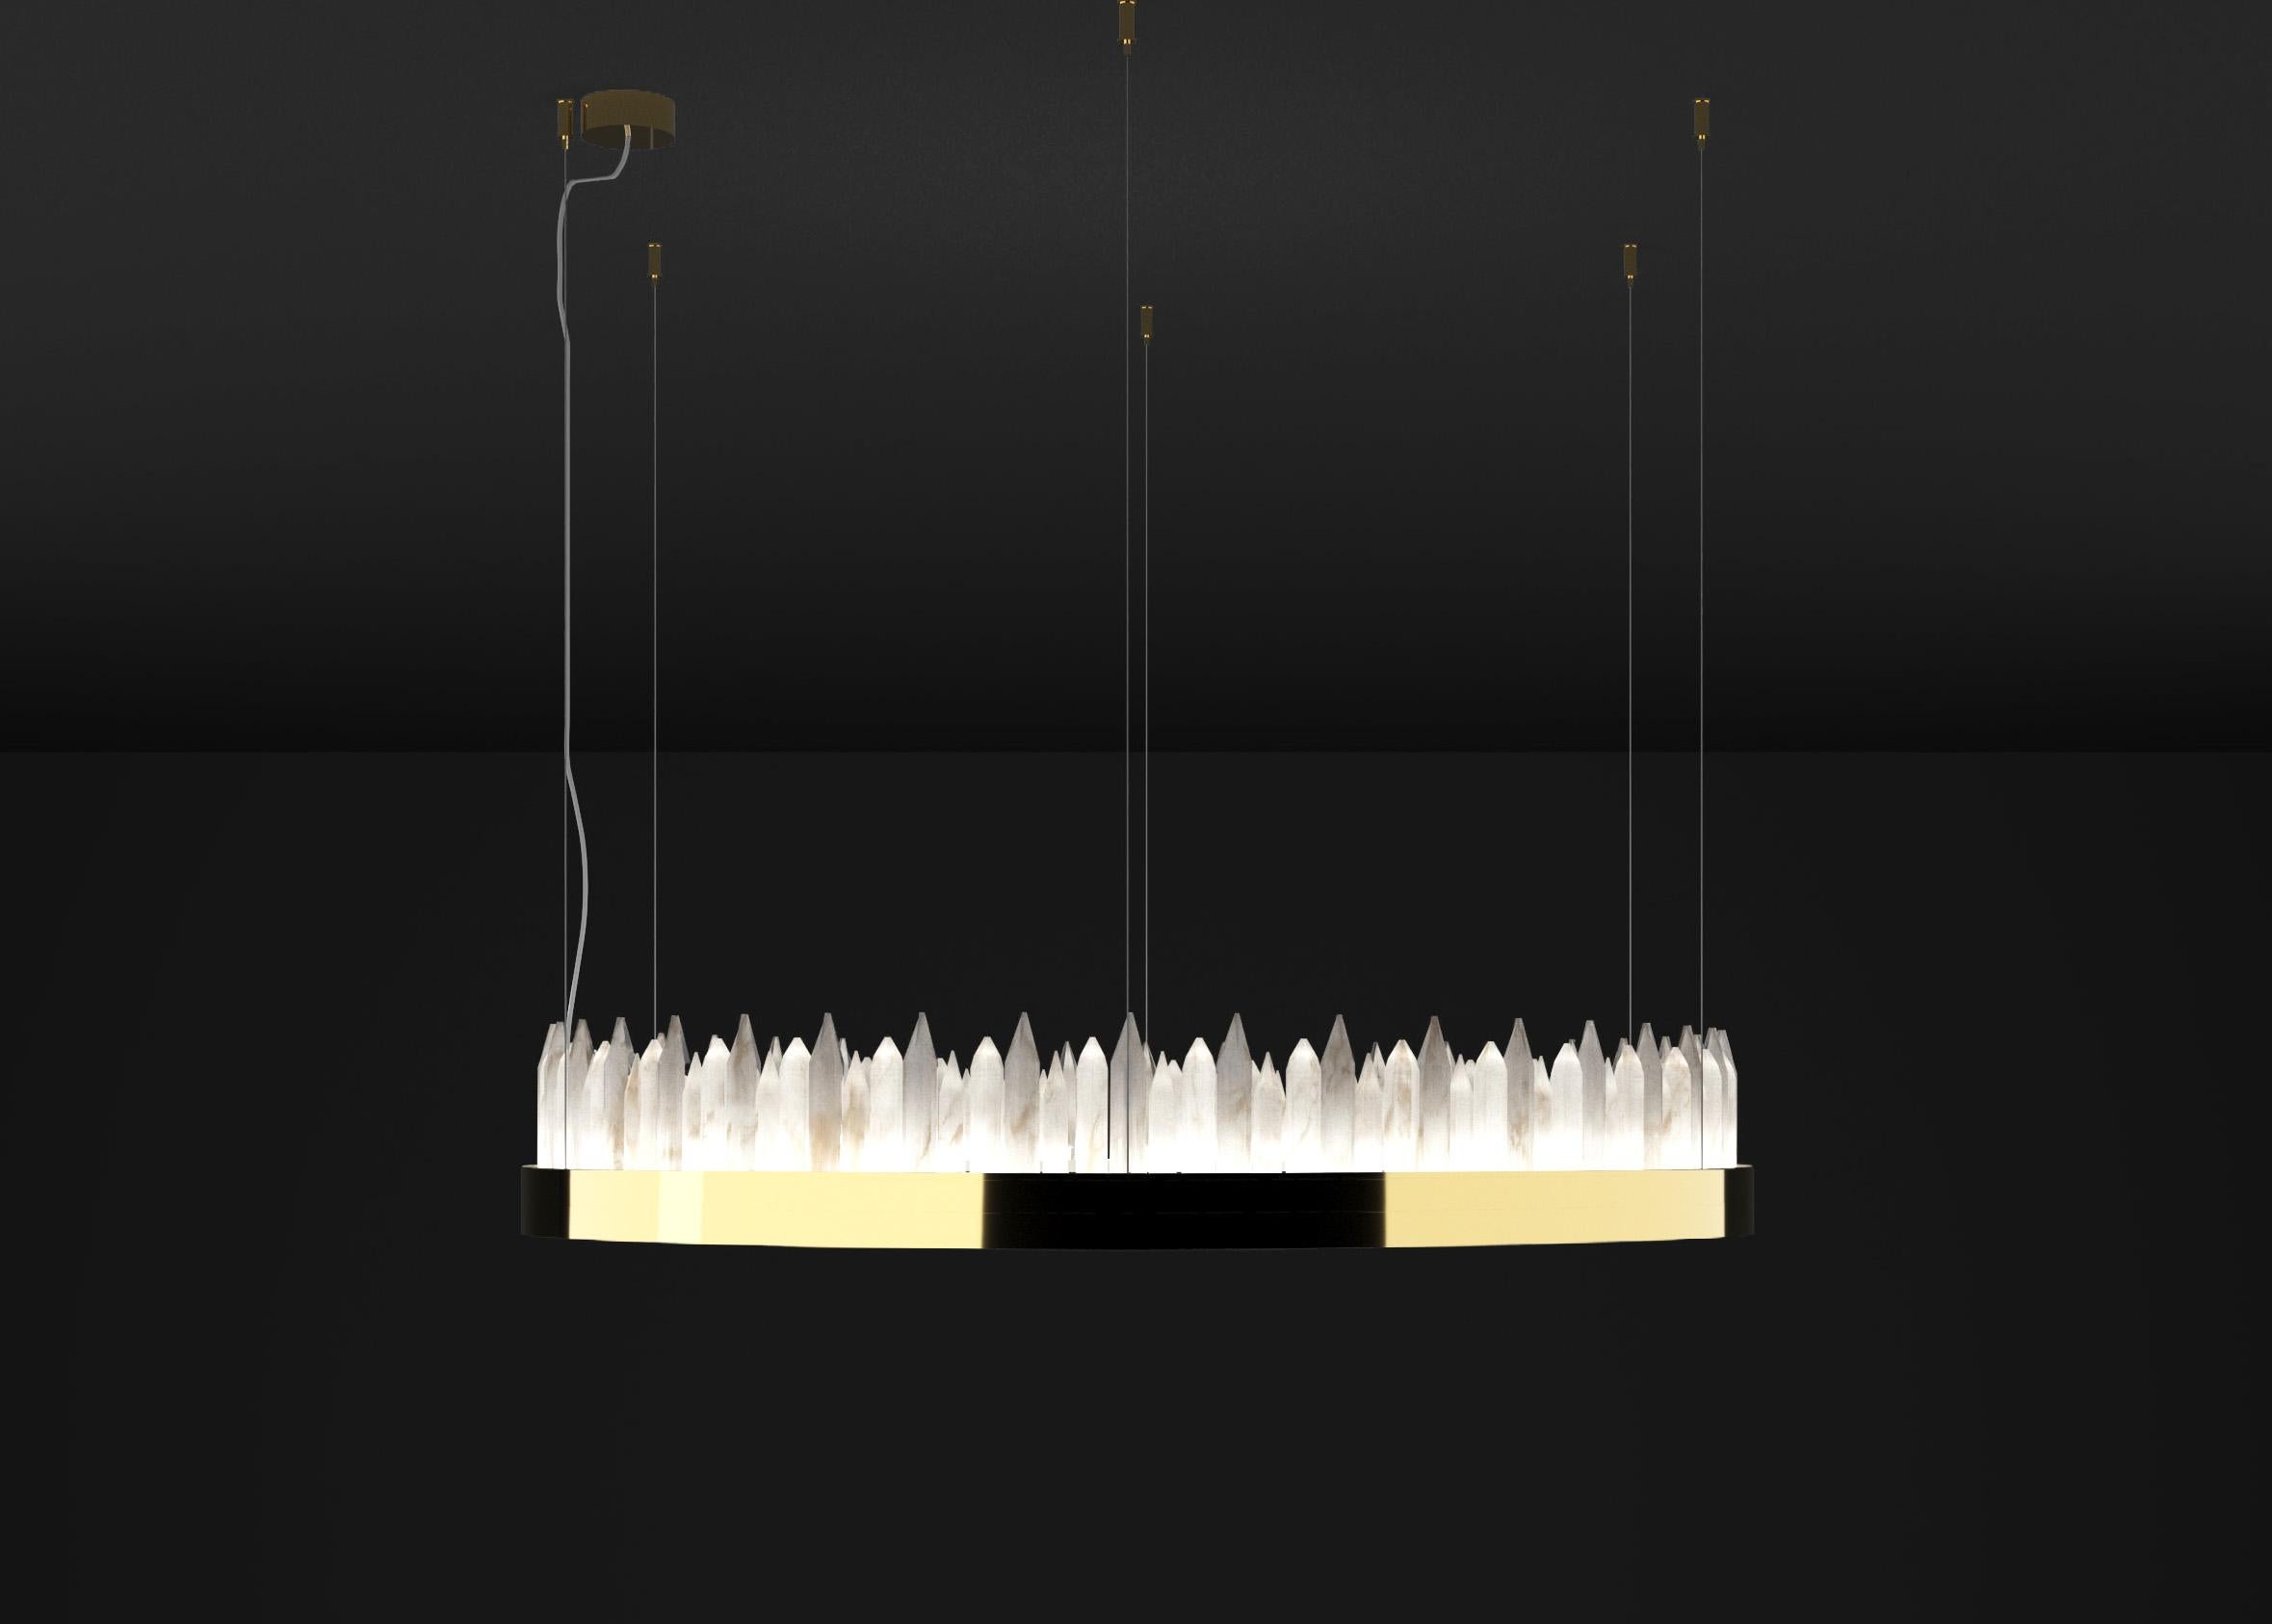 Urano Shiny Gold 120 Pendant Light 3 by Alabastro Italiano
Dimensions: Ø 120 x H 20 cm.
Materials: Glass and shiny gold metal.

2 x Strip LED, 162 Watt 16286 Lumen, 24 V, 3000 K.

Available in different sizes: Ø 60, Ø 80, Ø 100 and Ø 120 cm.